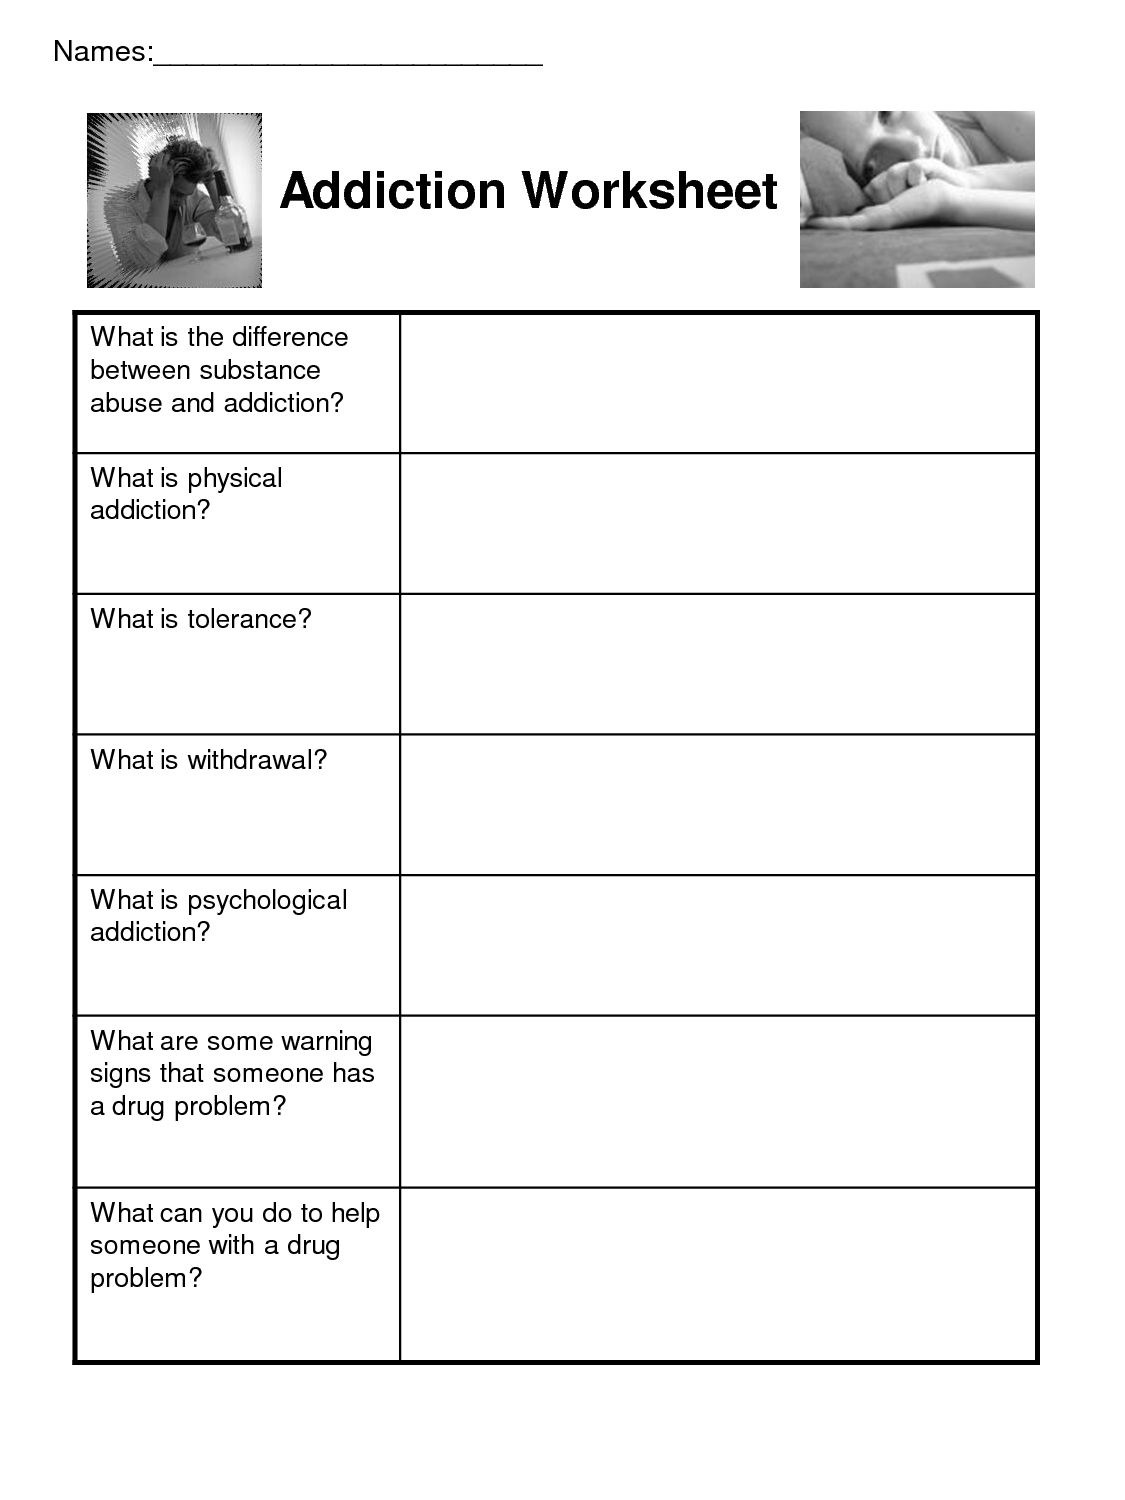 Self Esteem Worksheets For Adults In Additions Recovery AlphabetWorksheetsFree